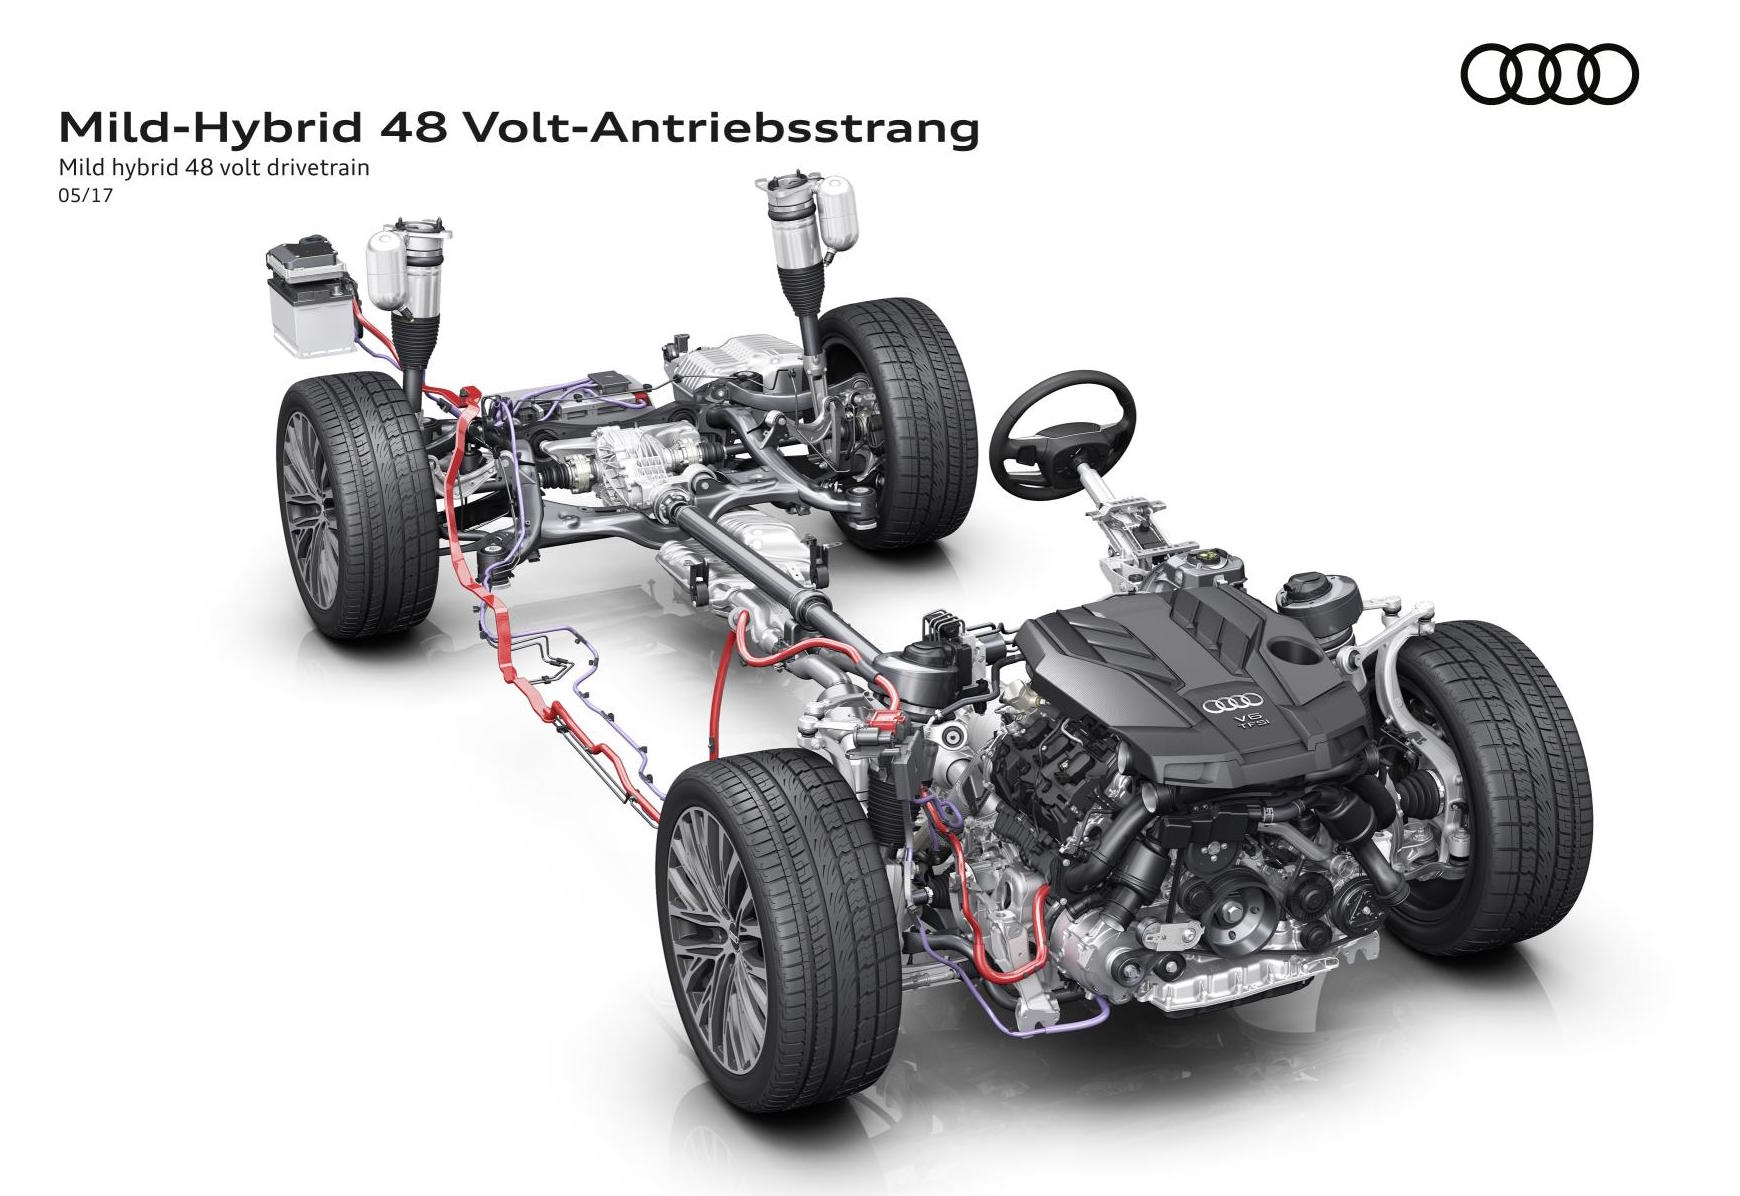 2018 Audi A8 48-volt electric system previewed, debuts July 11